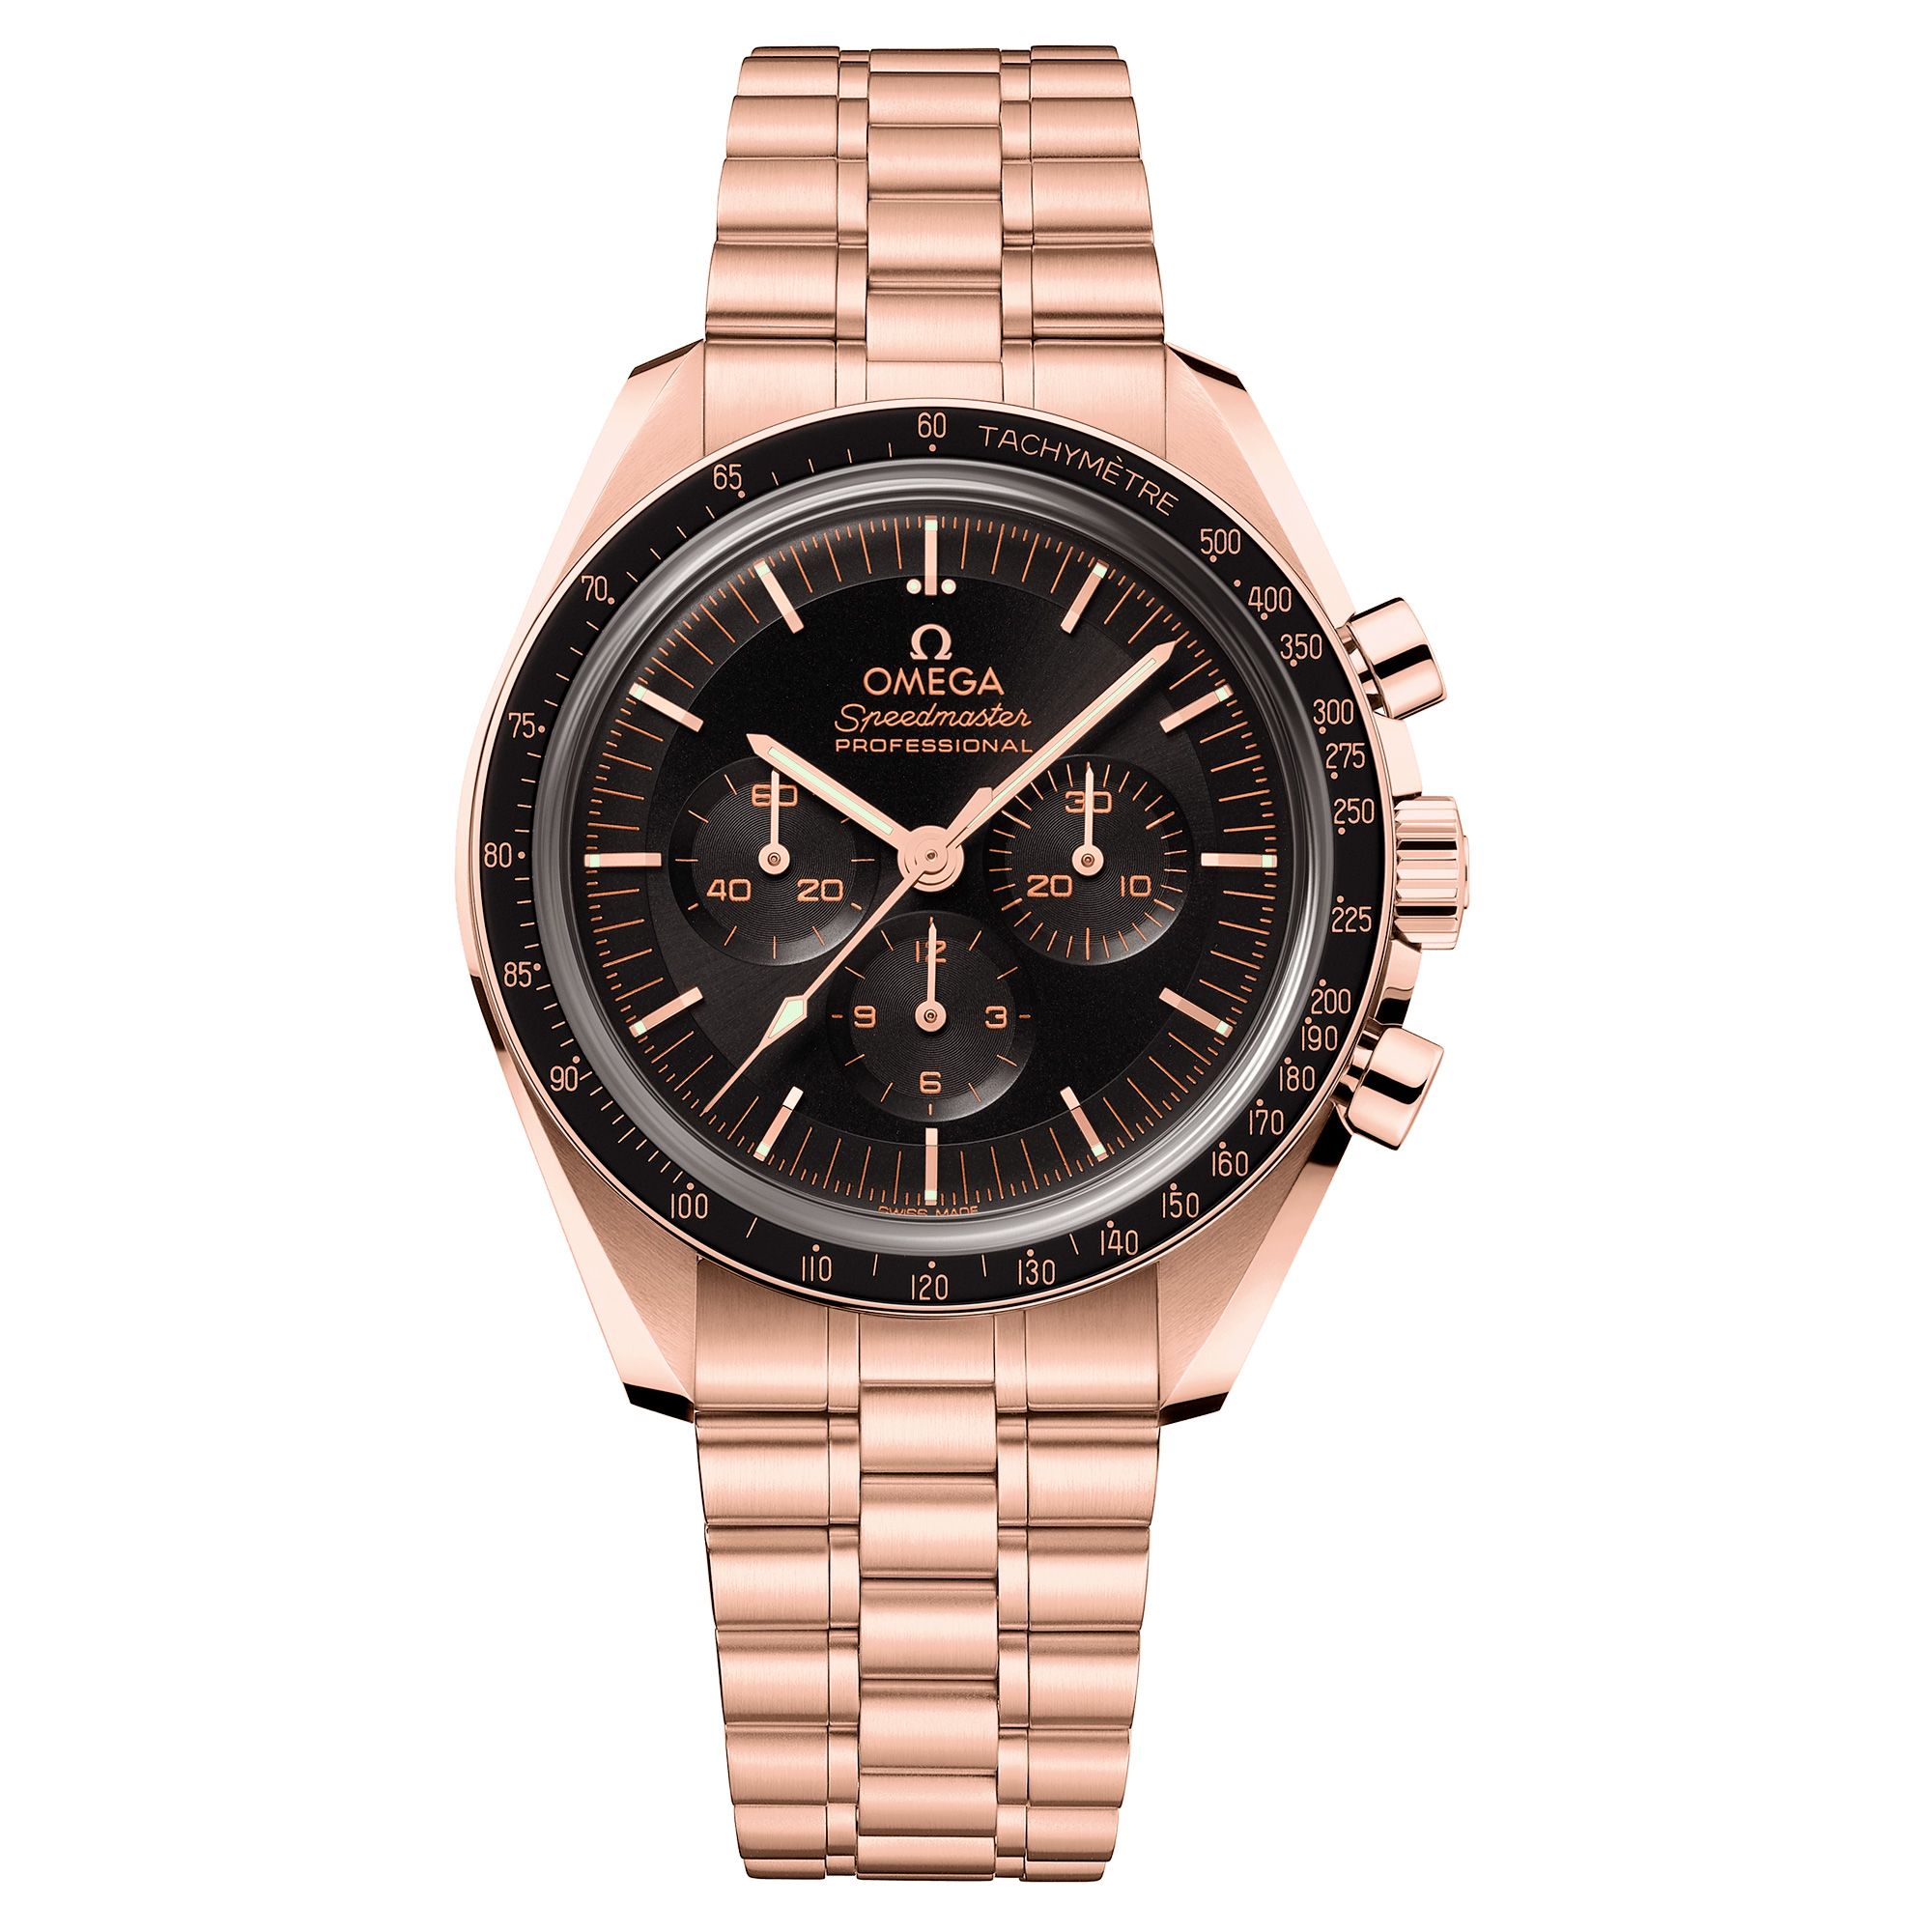 OMEGA Speedmaster Moonwatch Professional Co-Axial Master Chronometer Chronograph Sedna Gold Bracelet Watch | 42mm